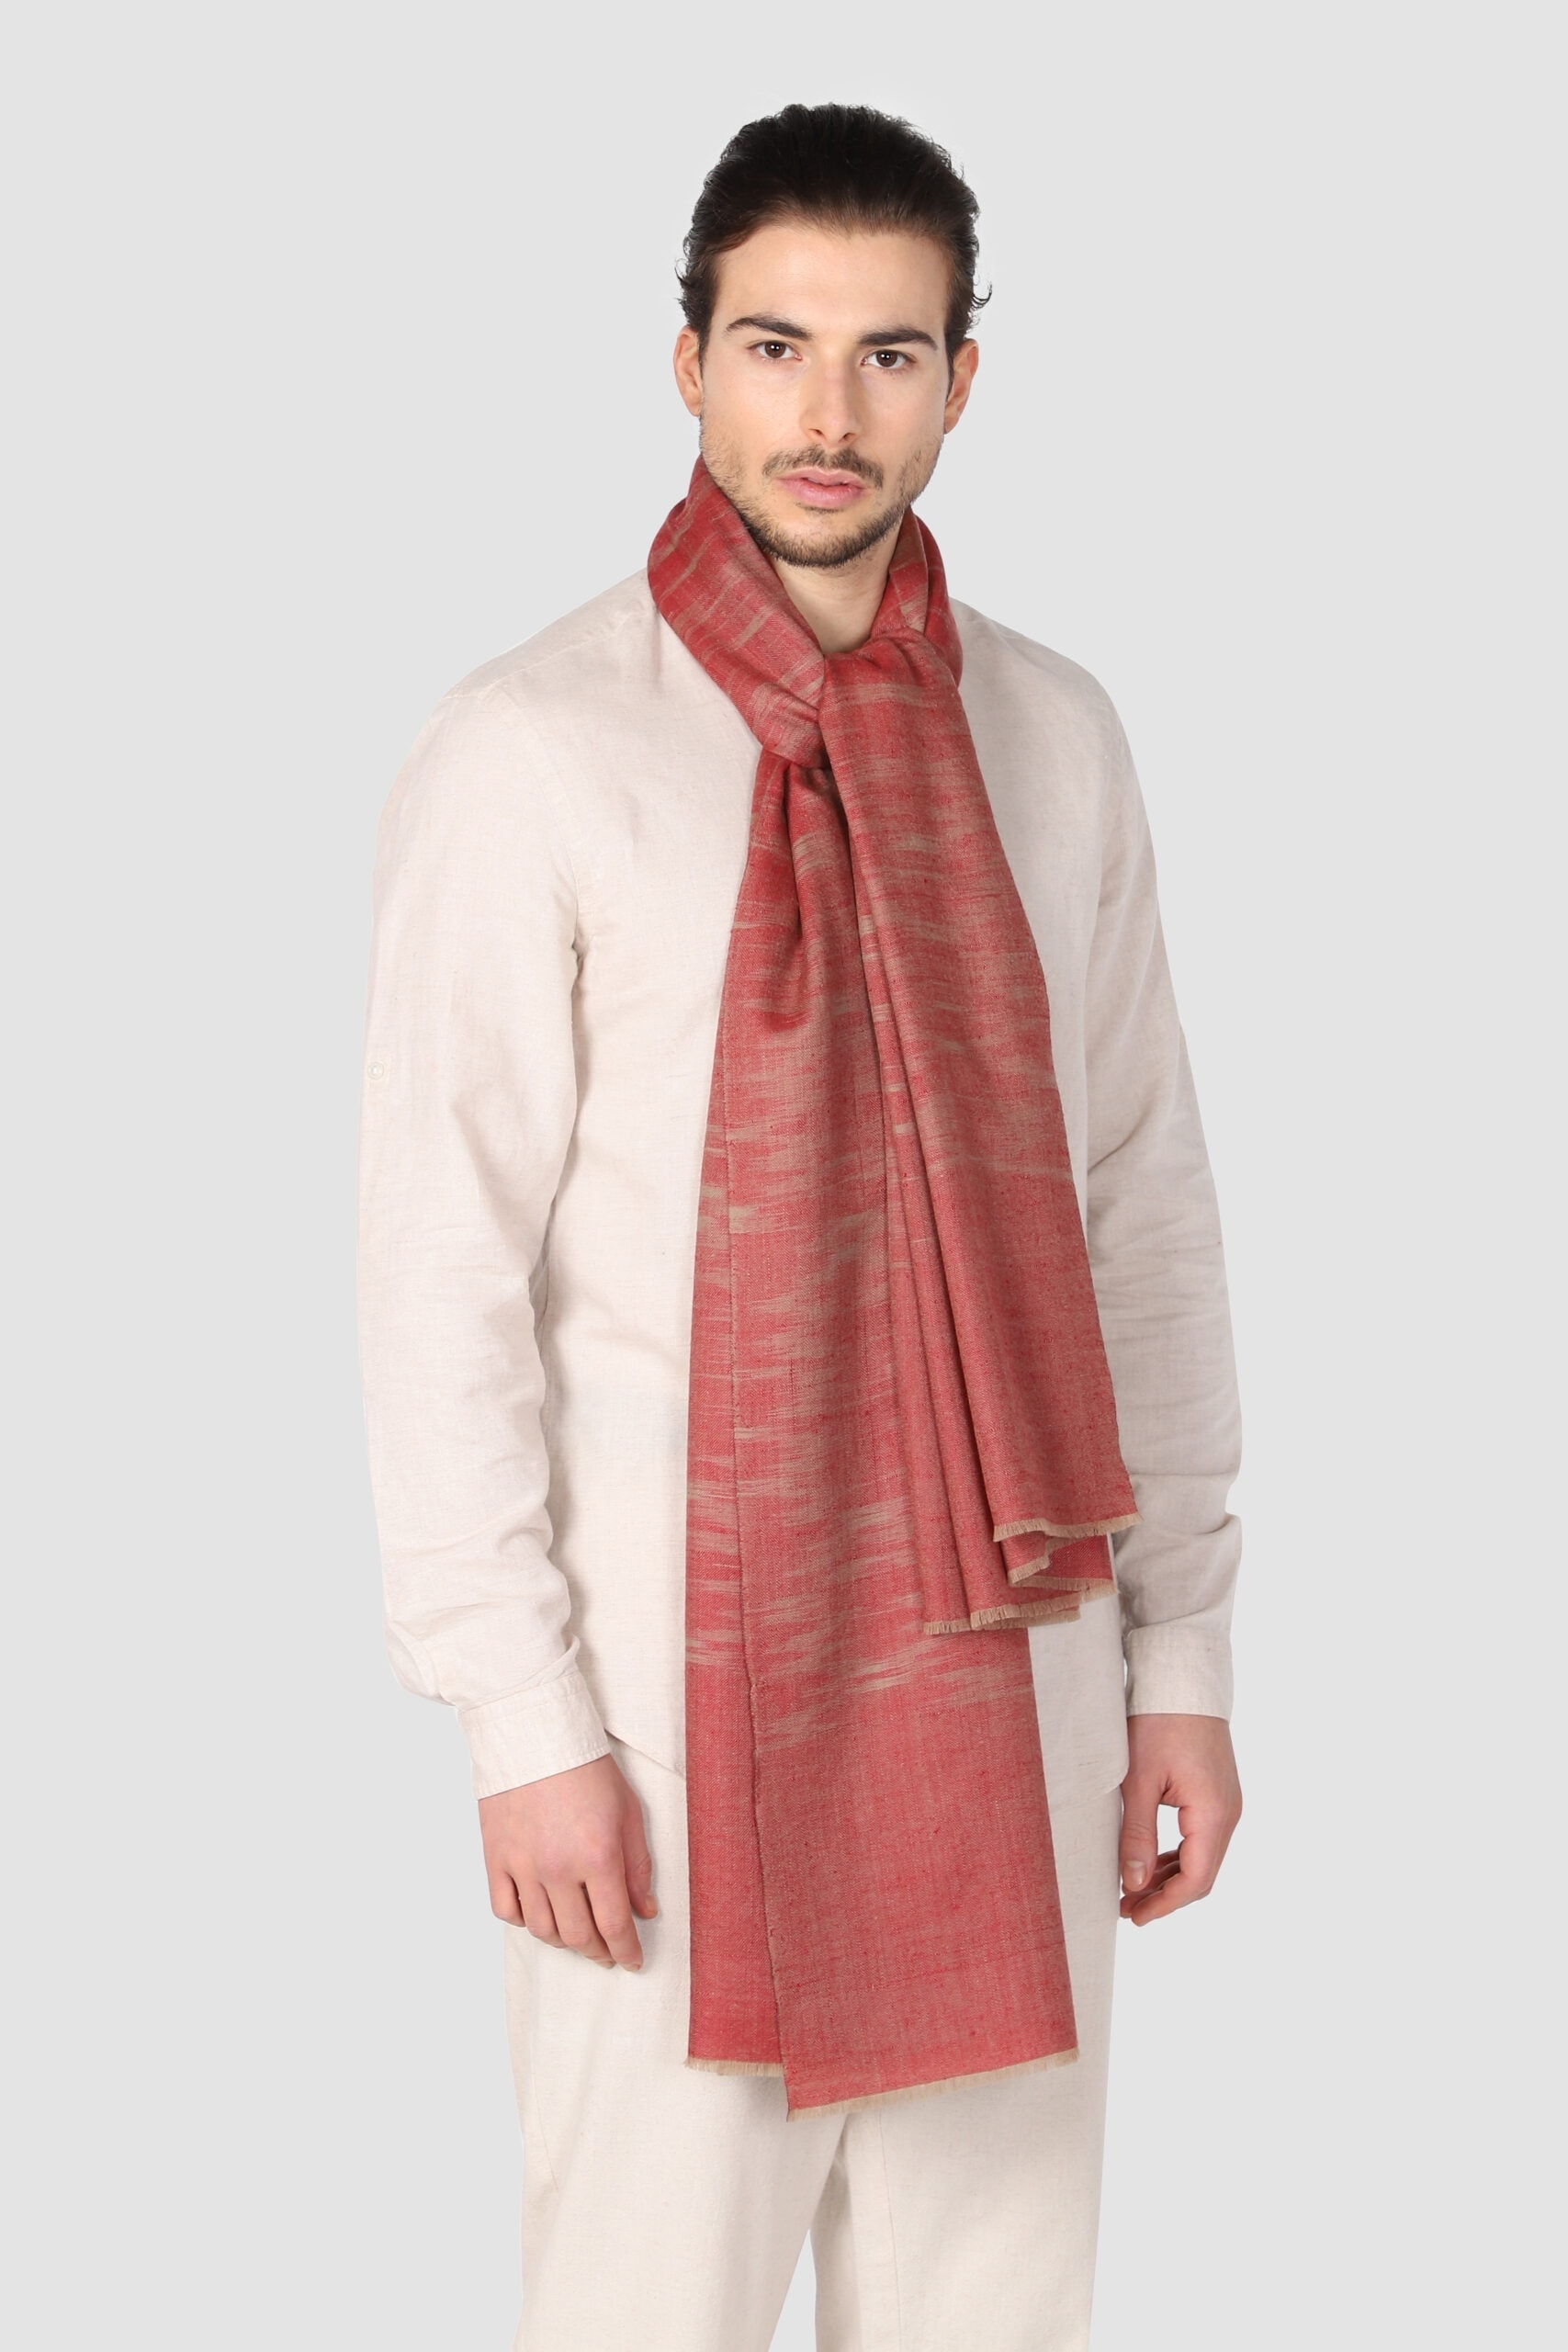 A man in ivory suit wearing Ikat Shawl in red & beige shade - Me and K